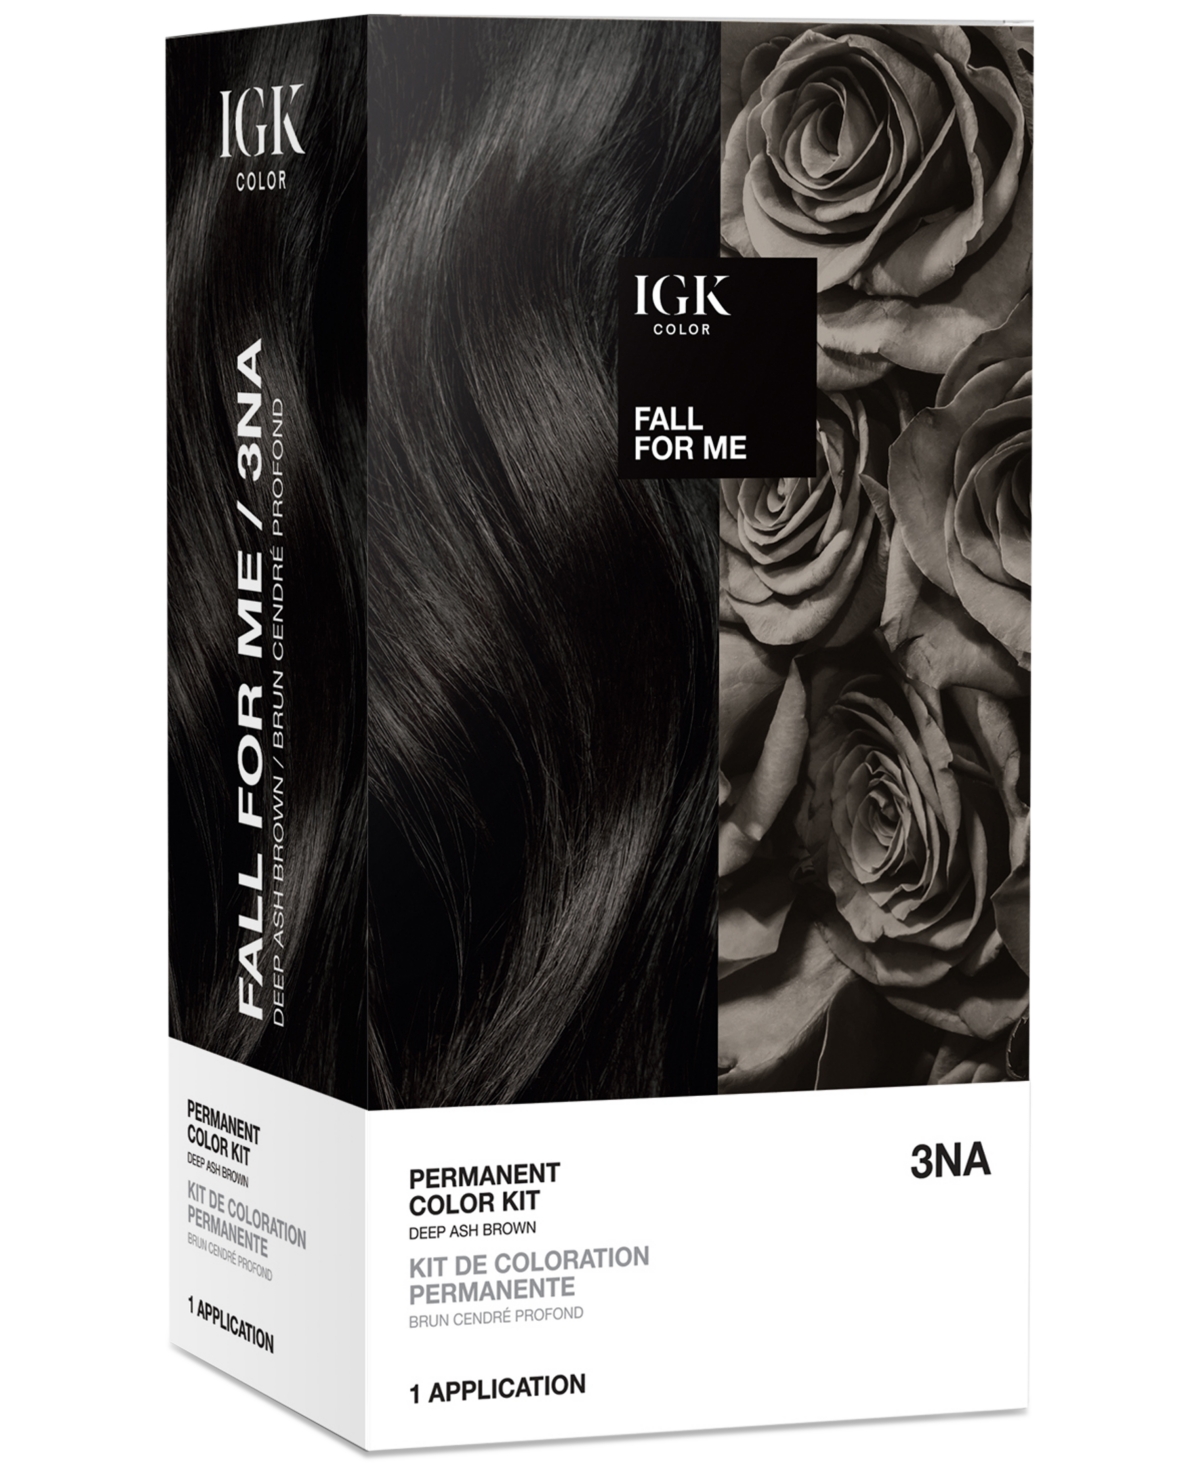 Igk Hair 6-pc. Permanent Color Set In Fall For Me